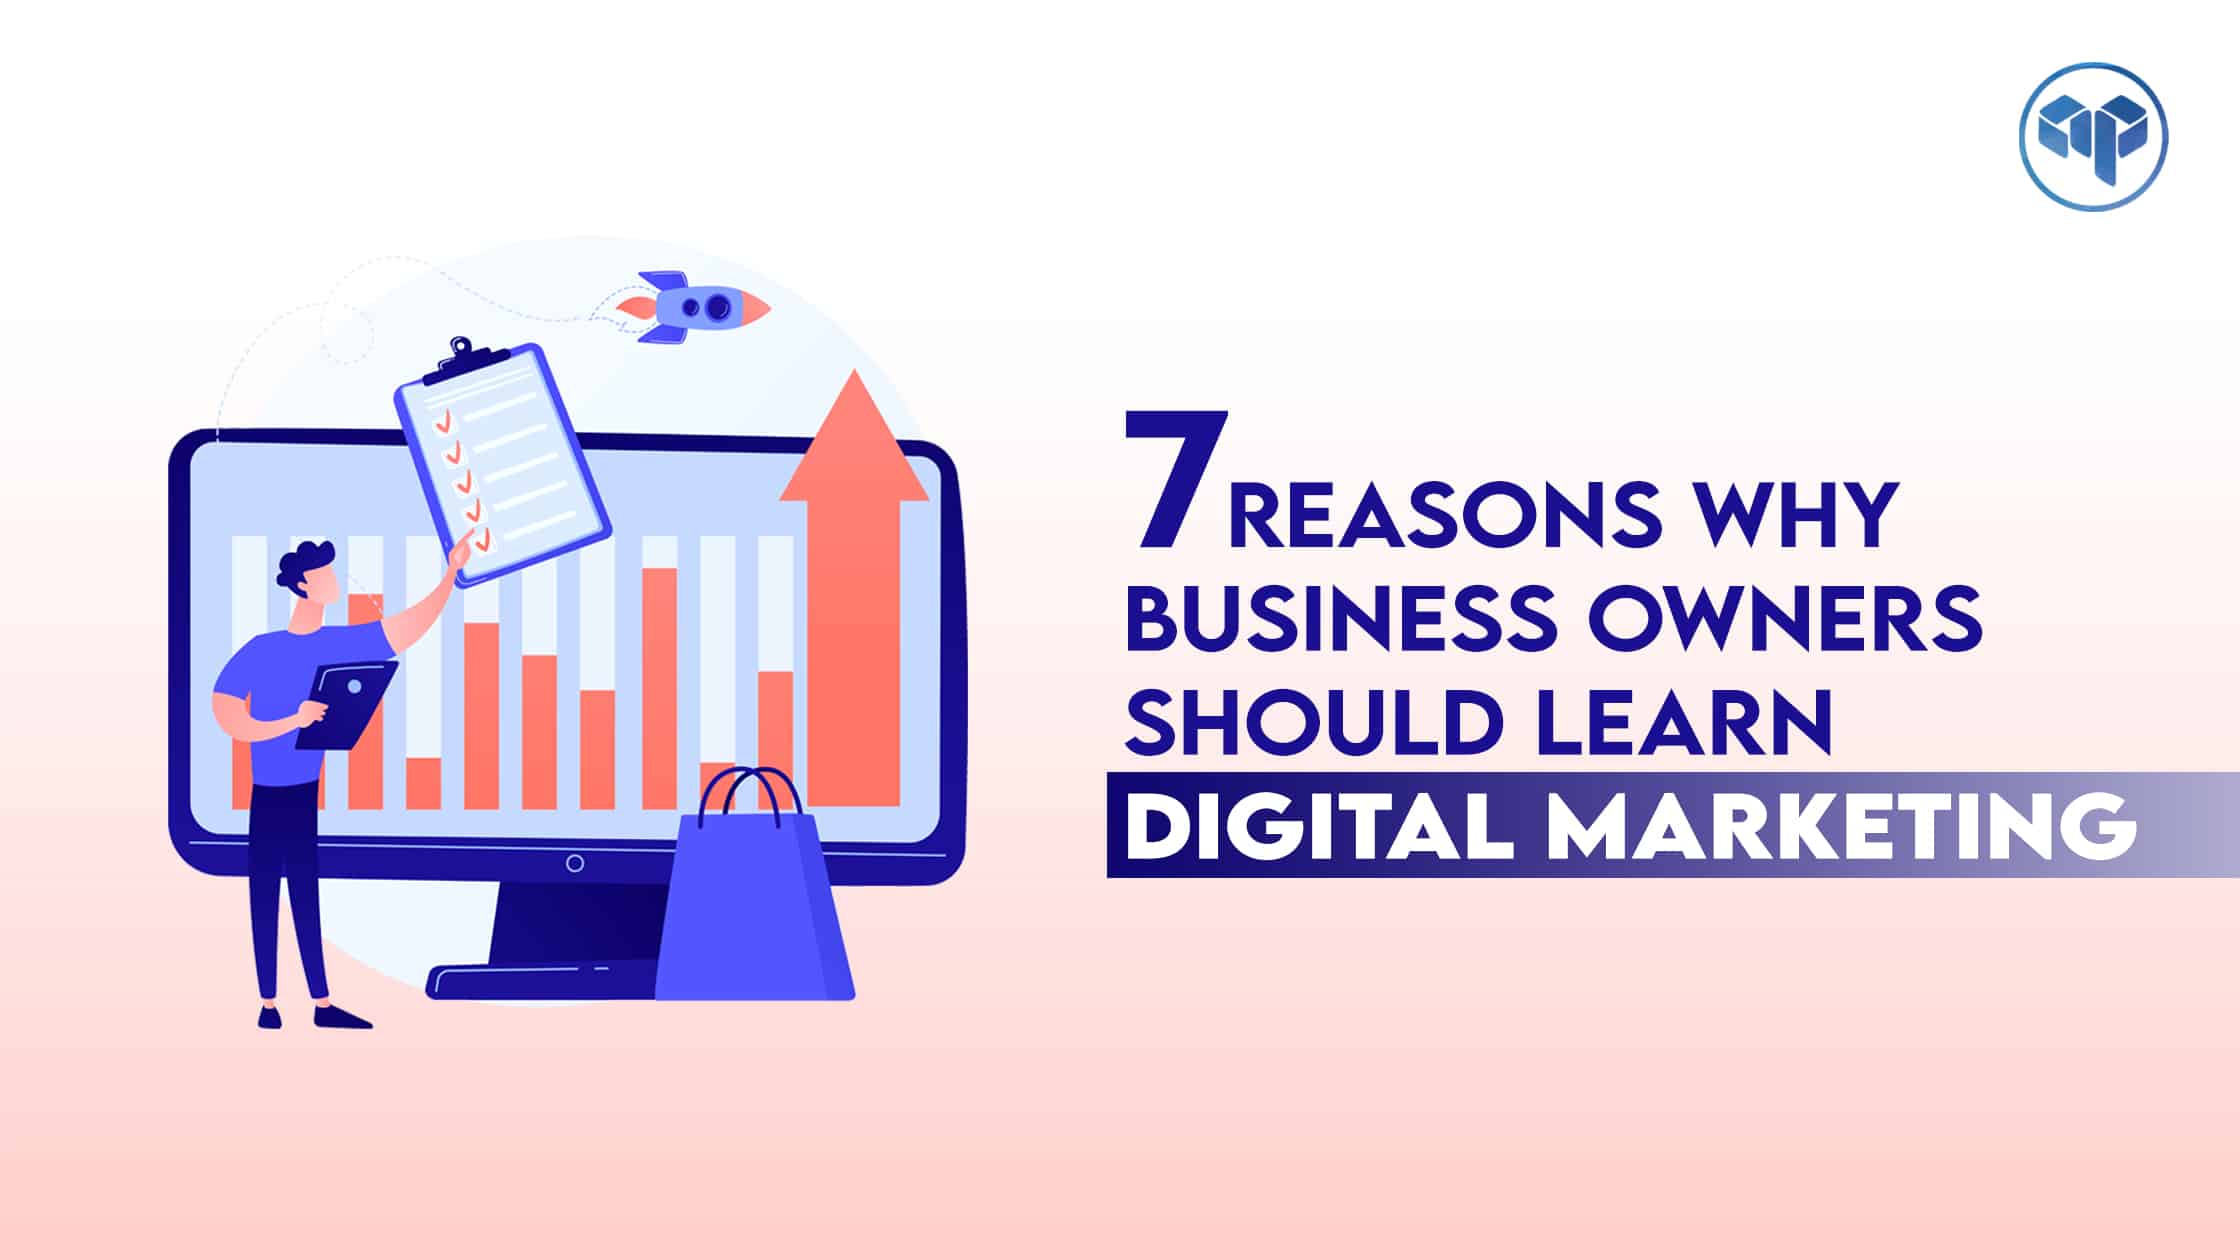 Why Should Business Owners Learn Digital Marketing?